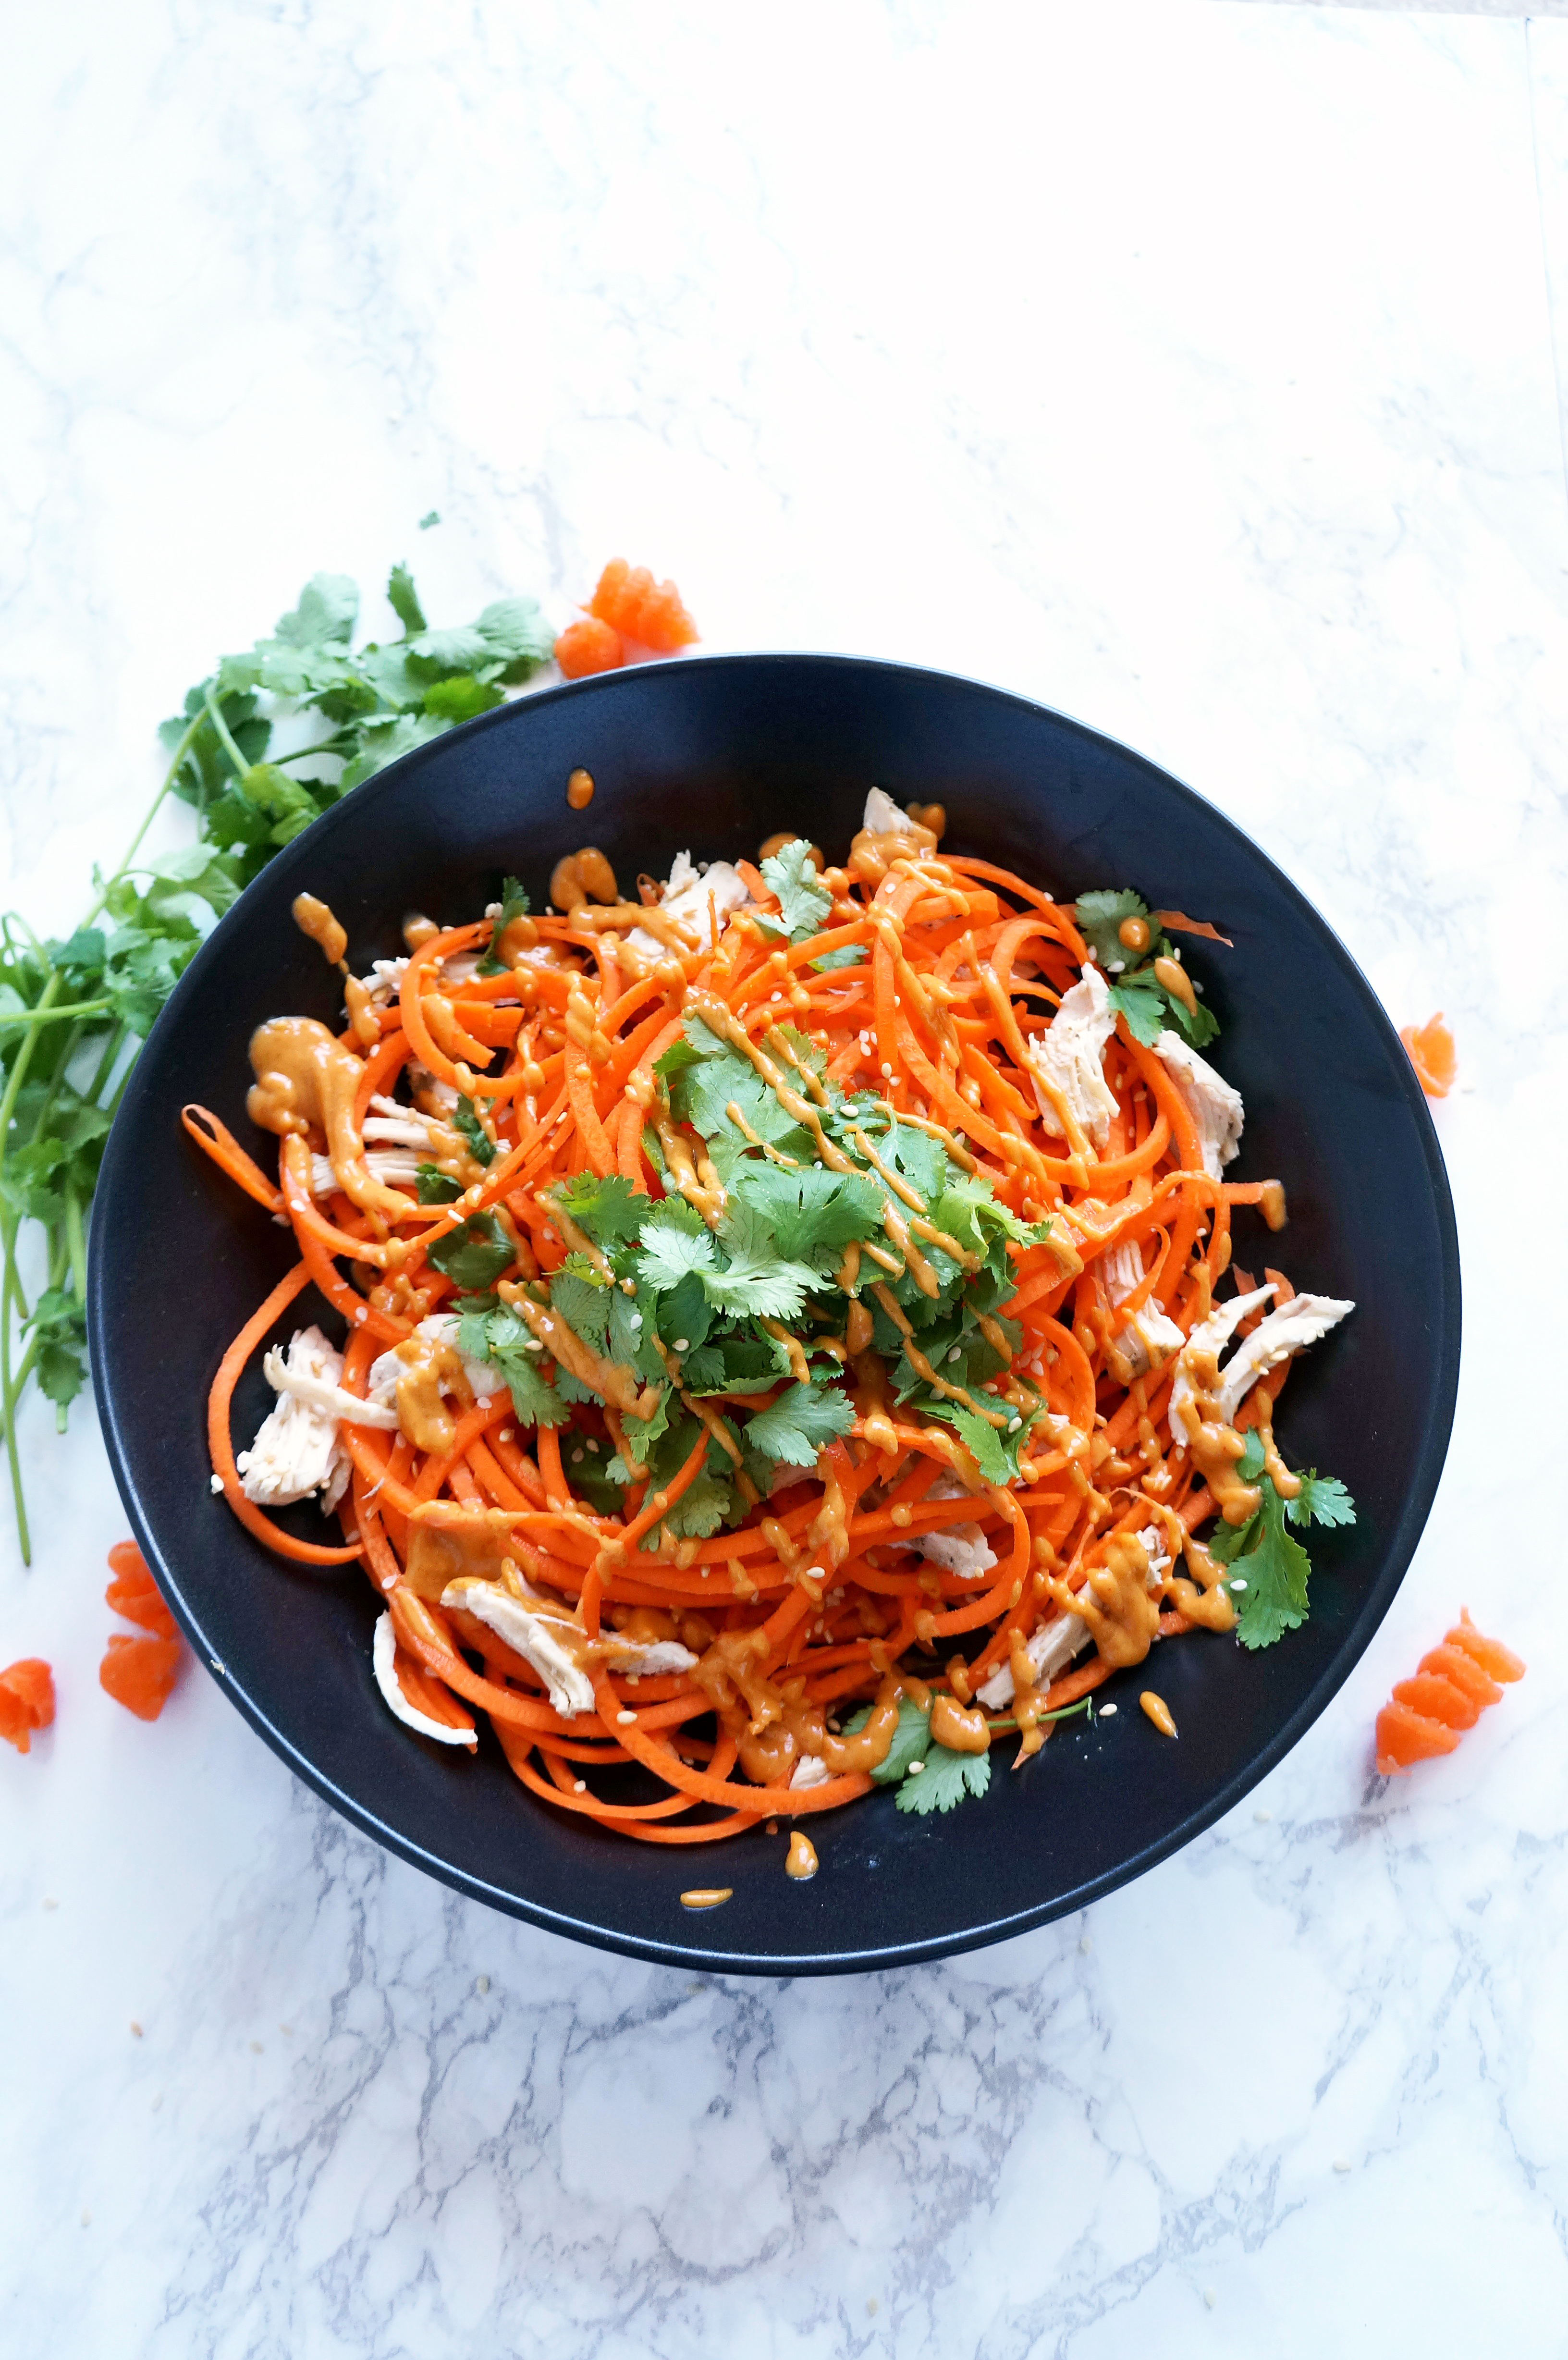 Carrot noodles with ginger curry sauce